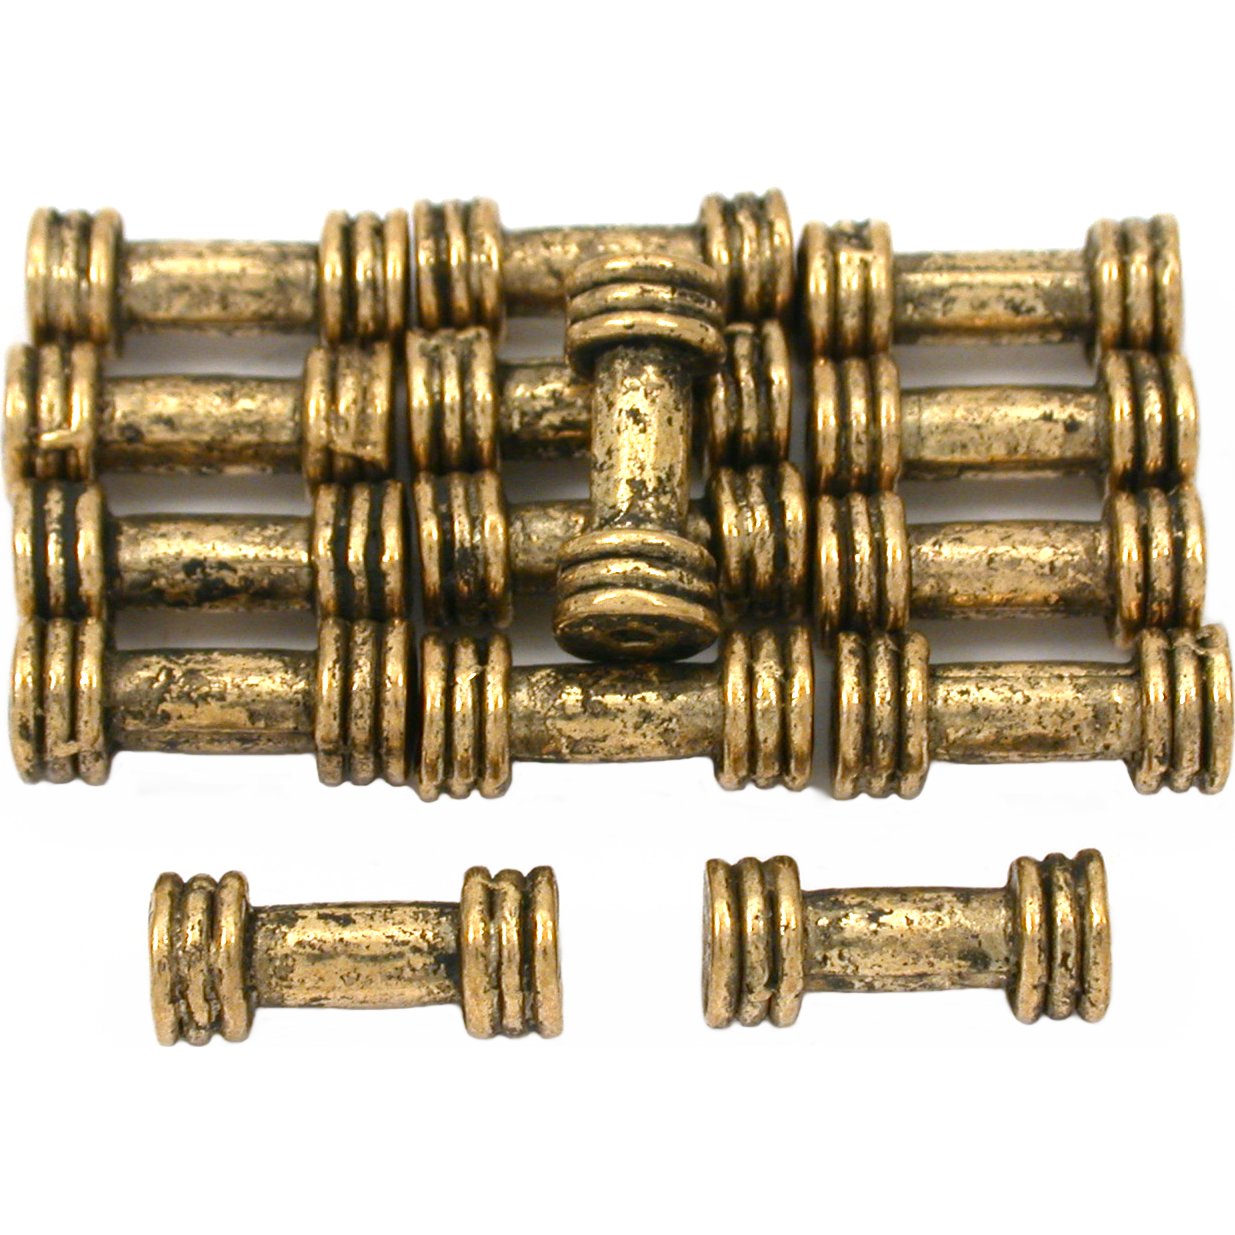 Bali Tube Antique Gold Plated Beads 12mm 15 Grams 15Pcs Approx.